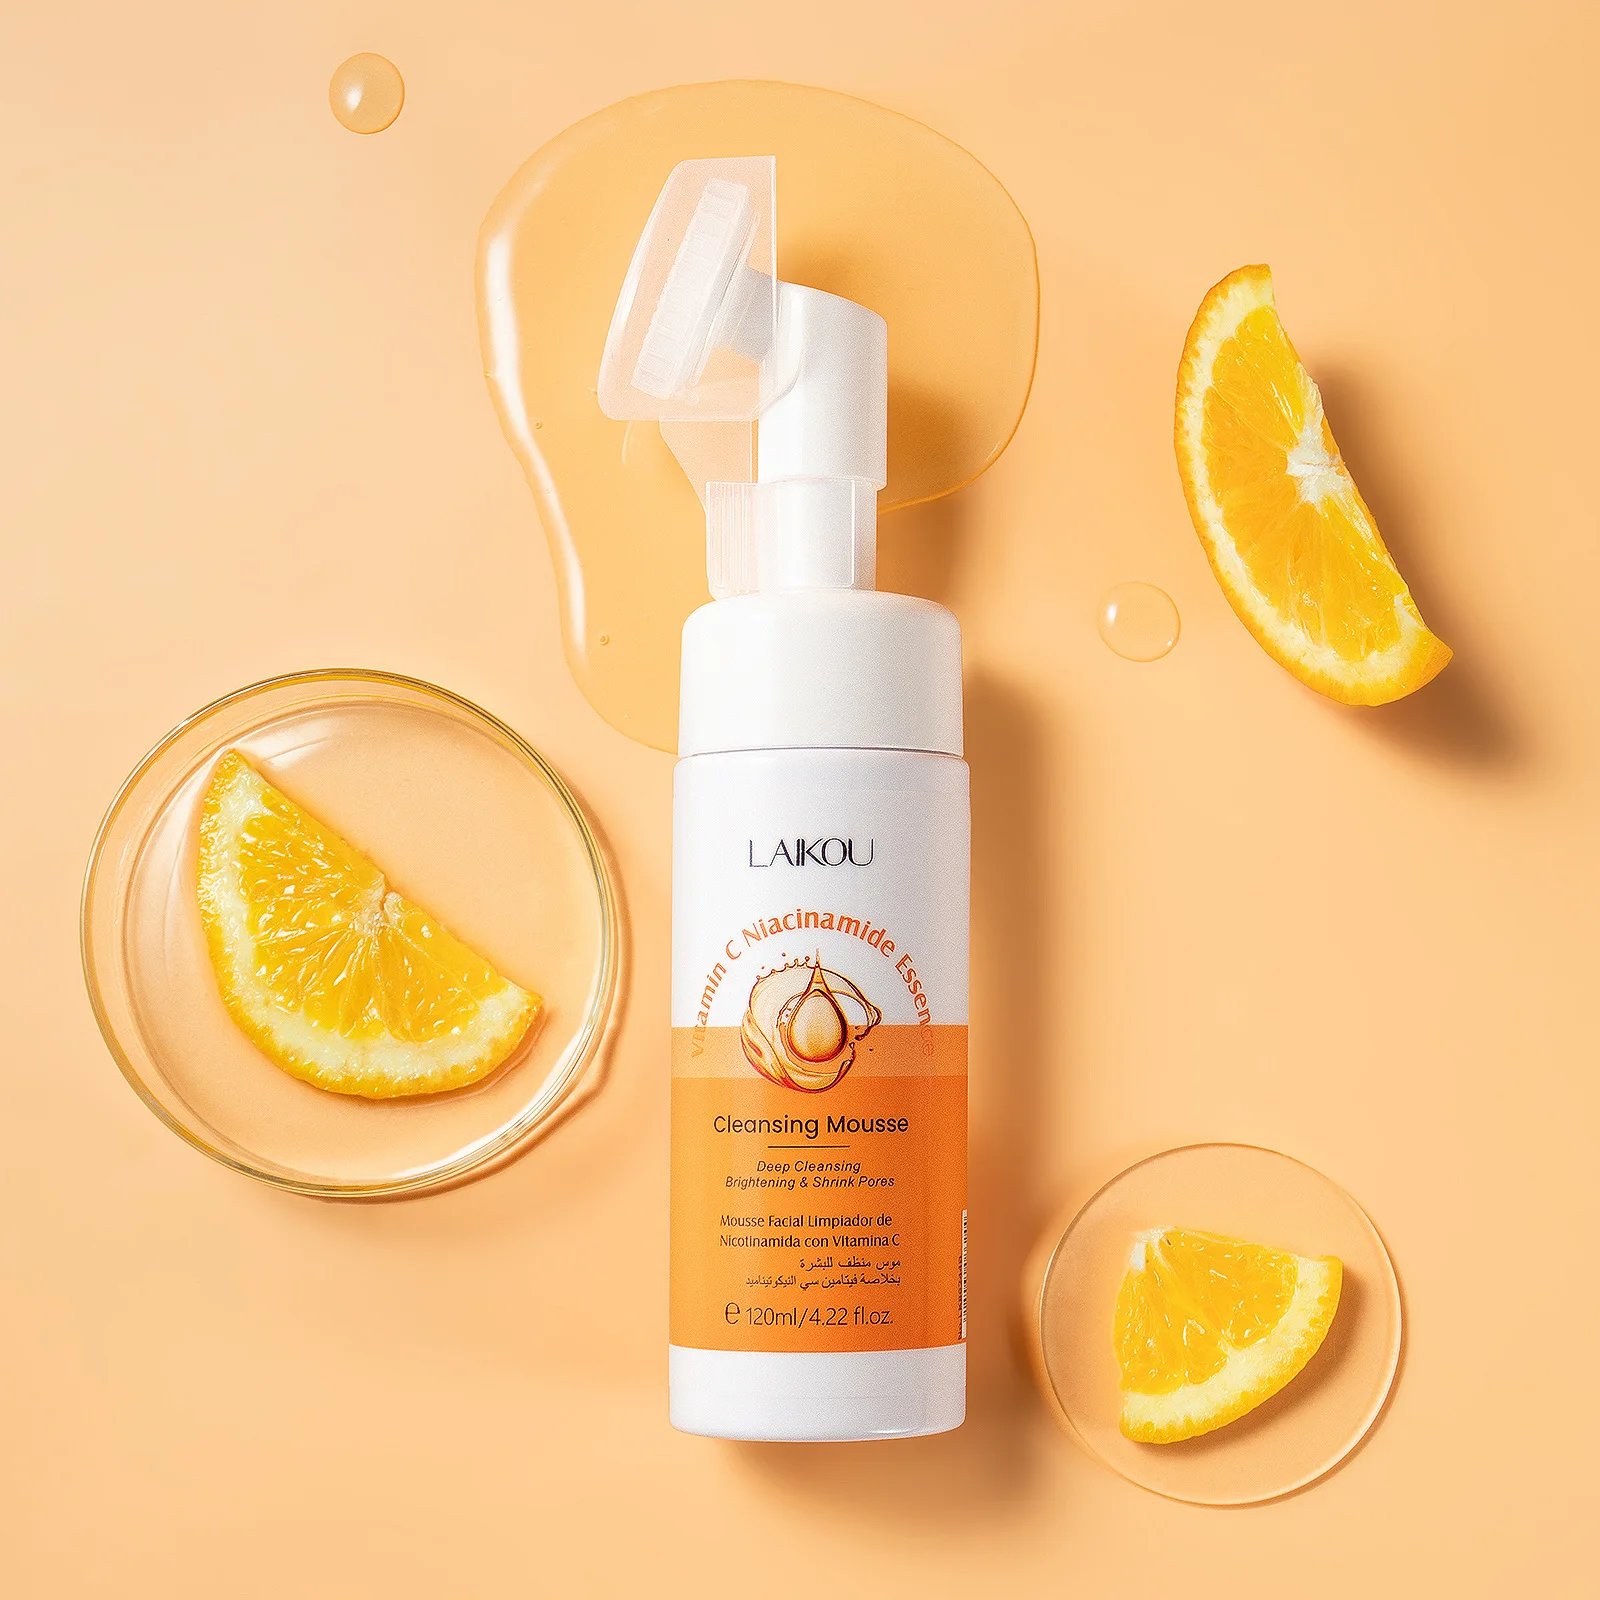 LAIKOU Vitamin C Facial Cleanser Skin Cleansing Moisturizing Blackhead Remove Skincare Face Wash Foam Face Skin Care osufi collagen soothing facial cleanser foam face wash remove blackhead shrink pores deep cleaning oil control whitening skin